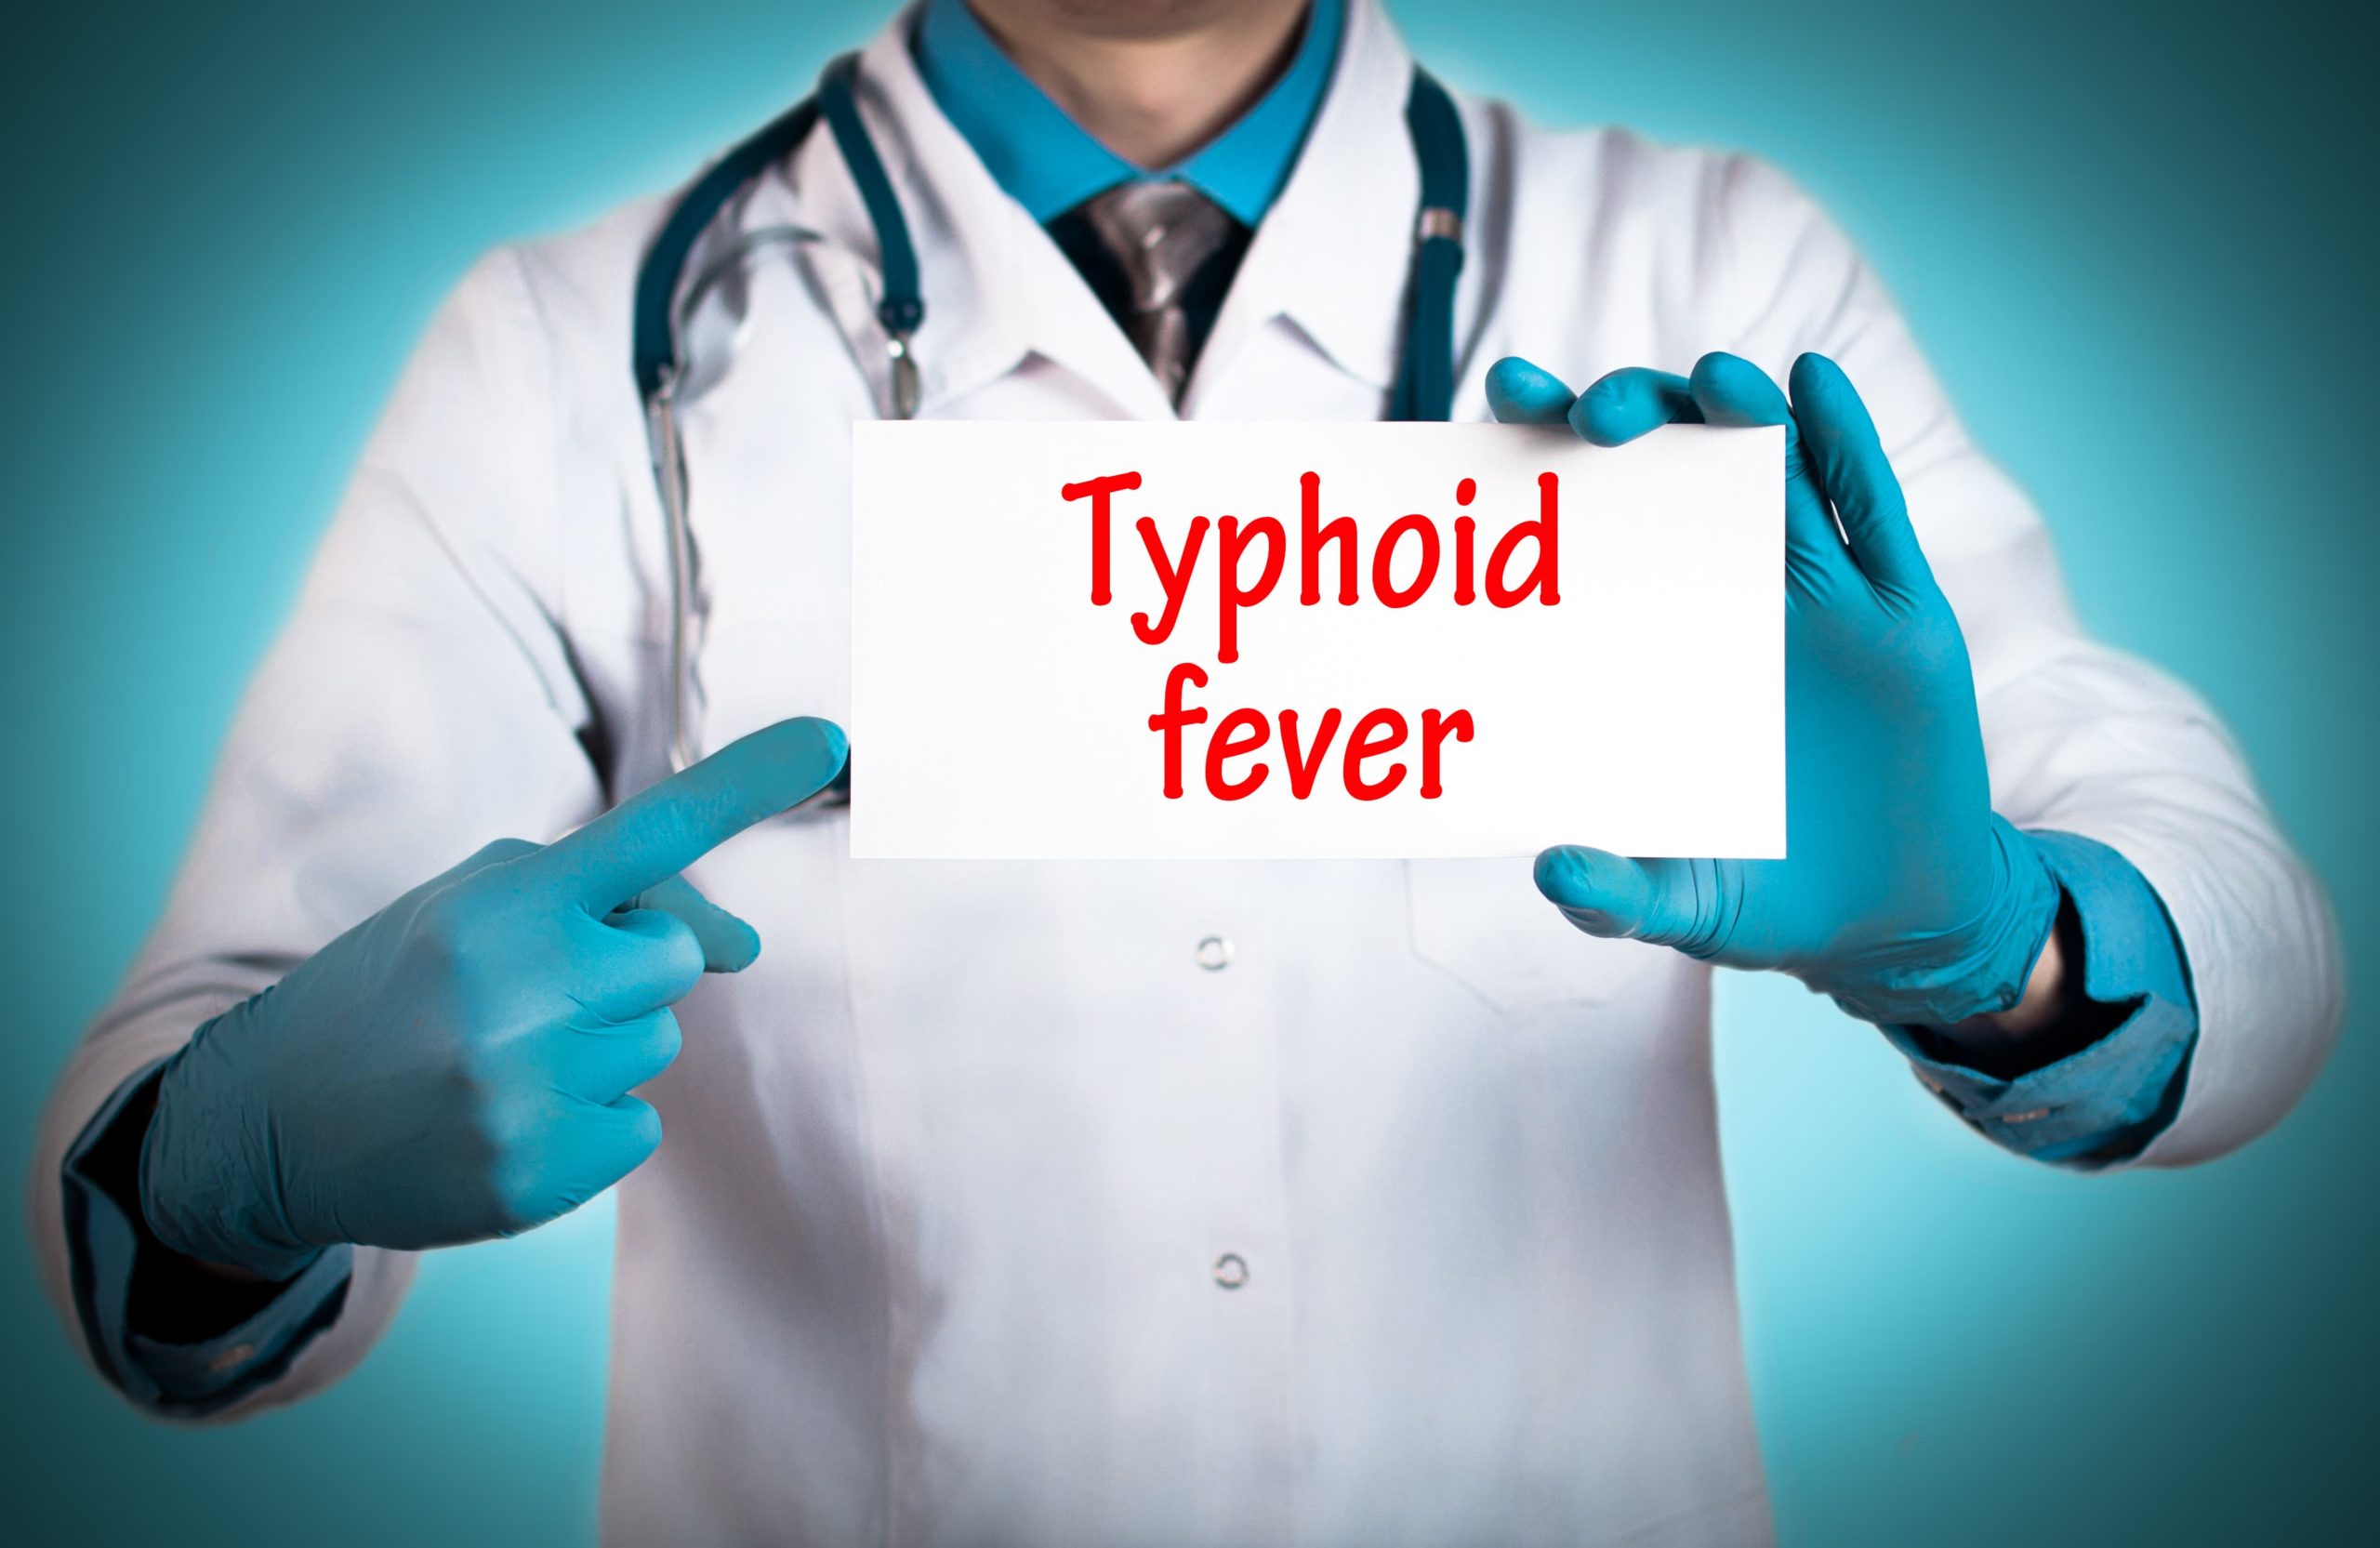 What Part Of The Body Does Typhoid Fever Attack?